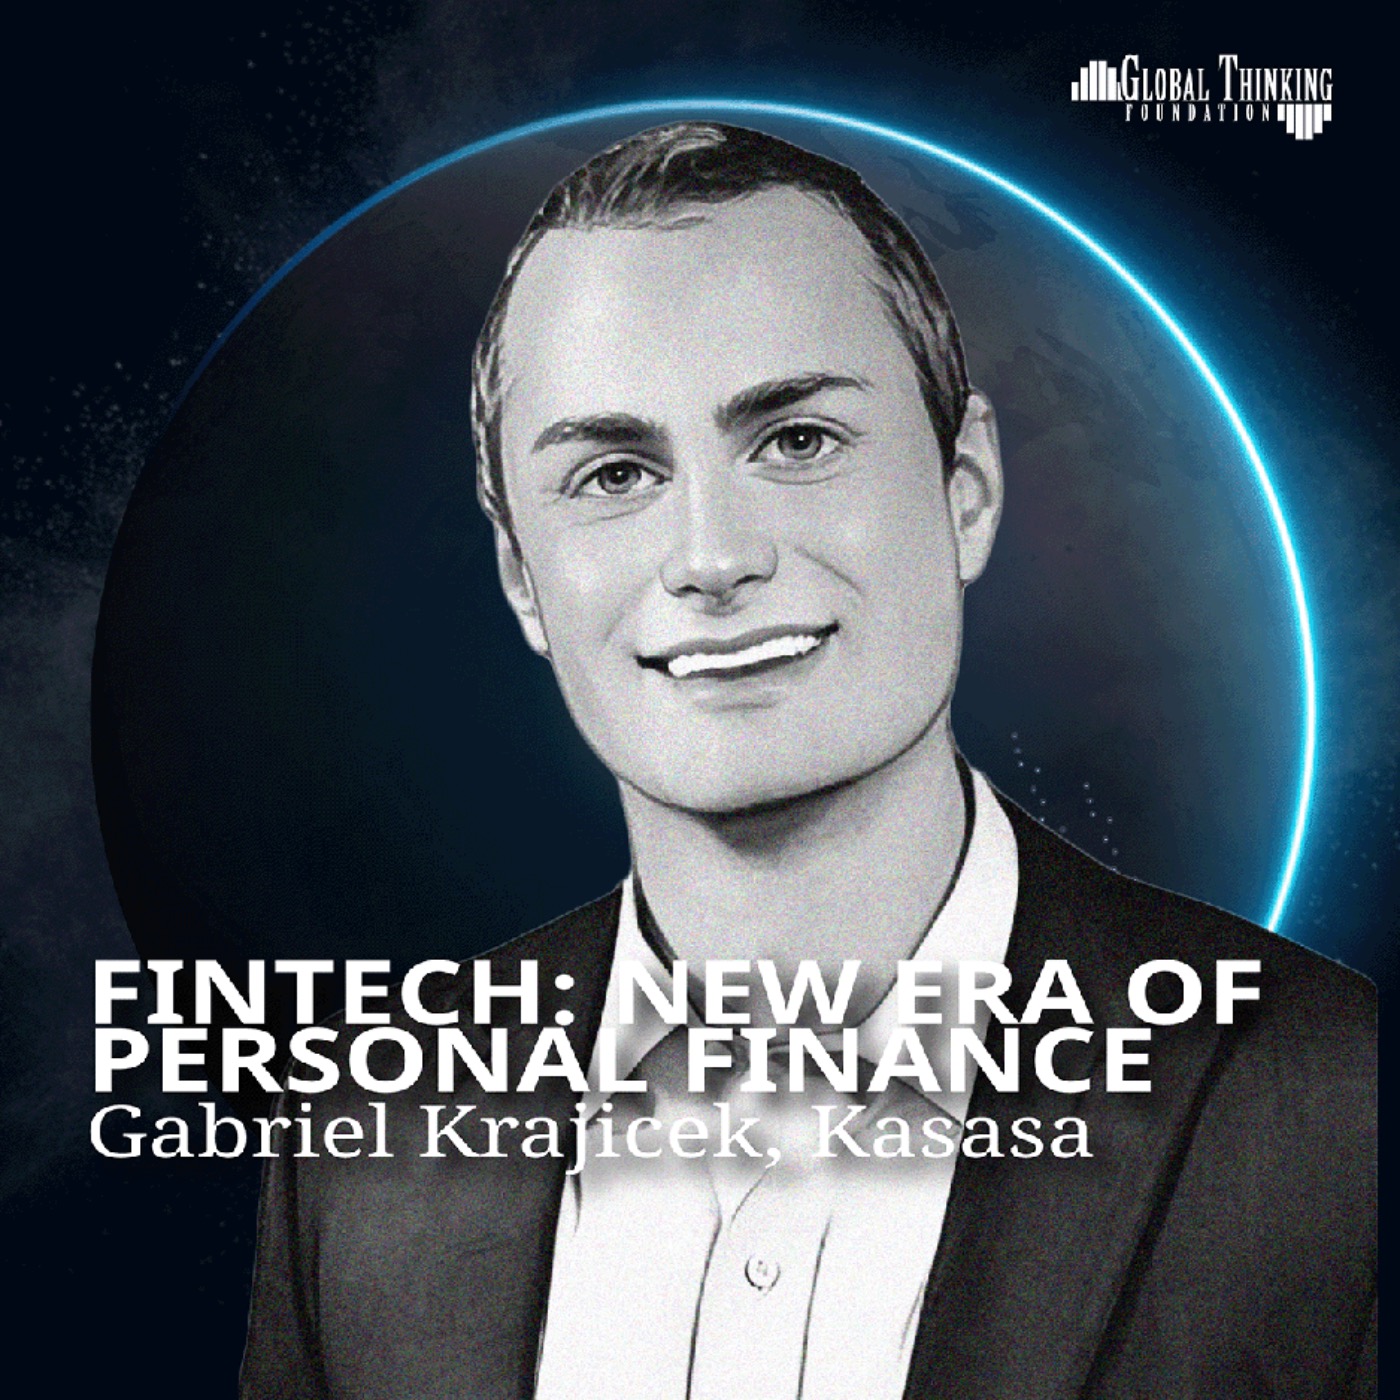 Community Banking: New Era of Fintech and Personal Finance